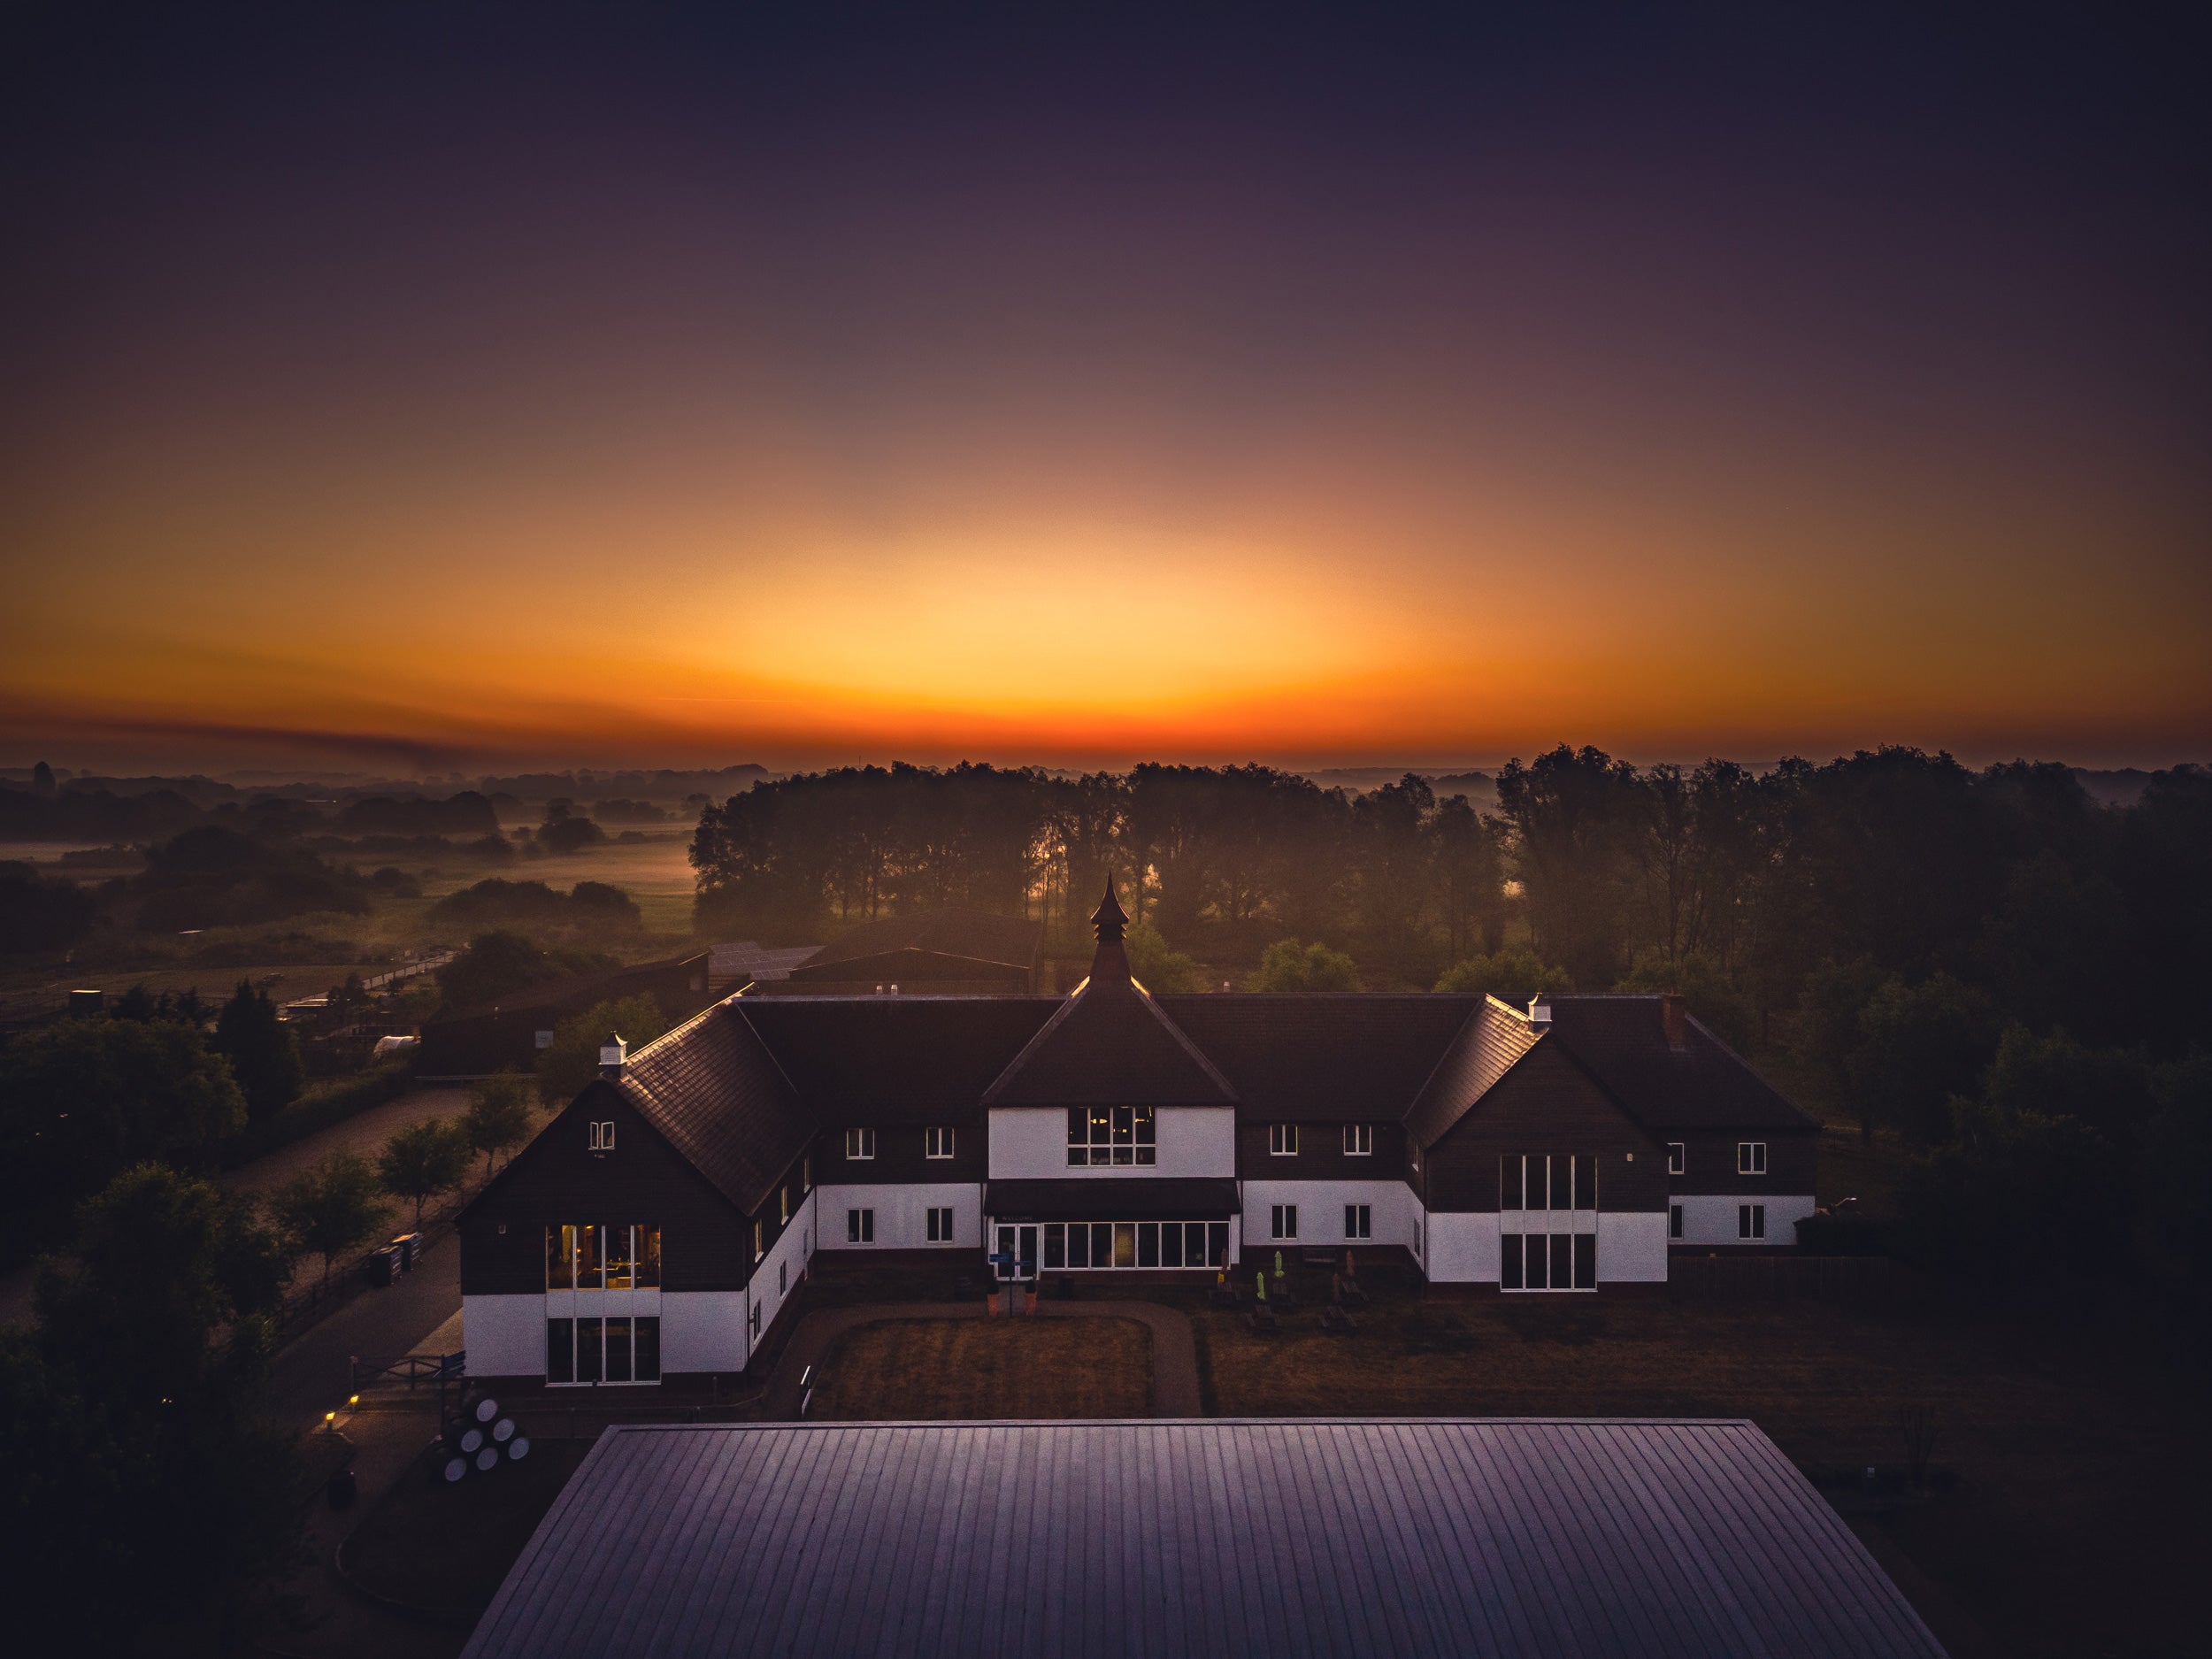 View of The English Distillery at dawn